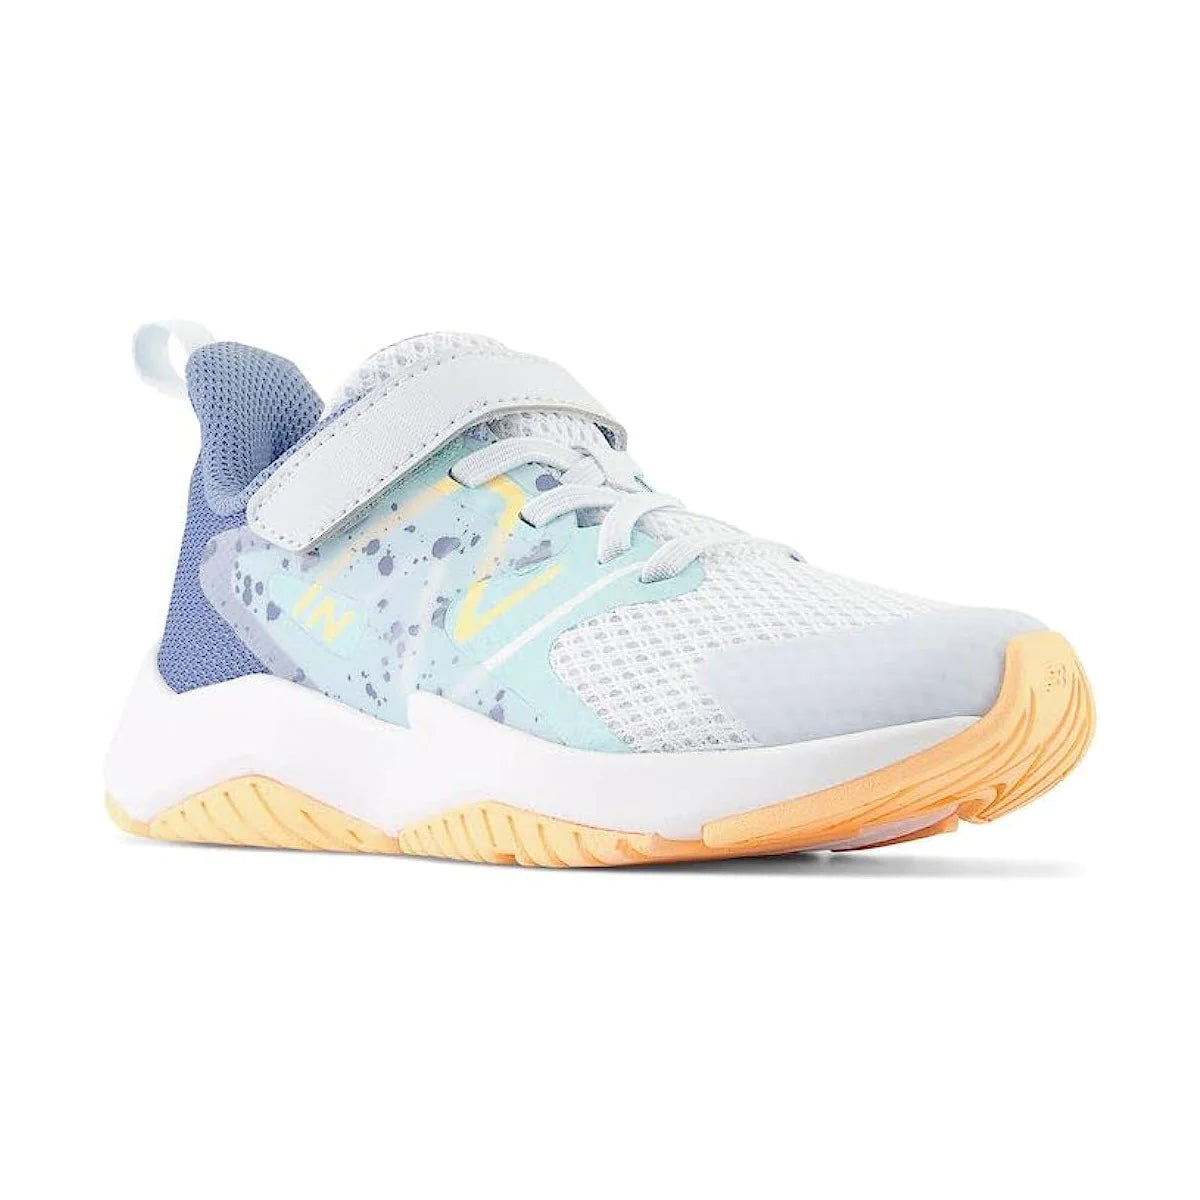 Rave Run v2 Bungee Lace with Top Strap Ice Blue (10.5c-3Y)